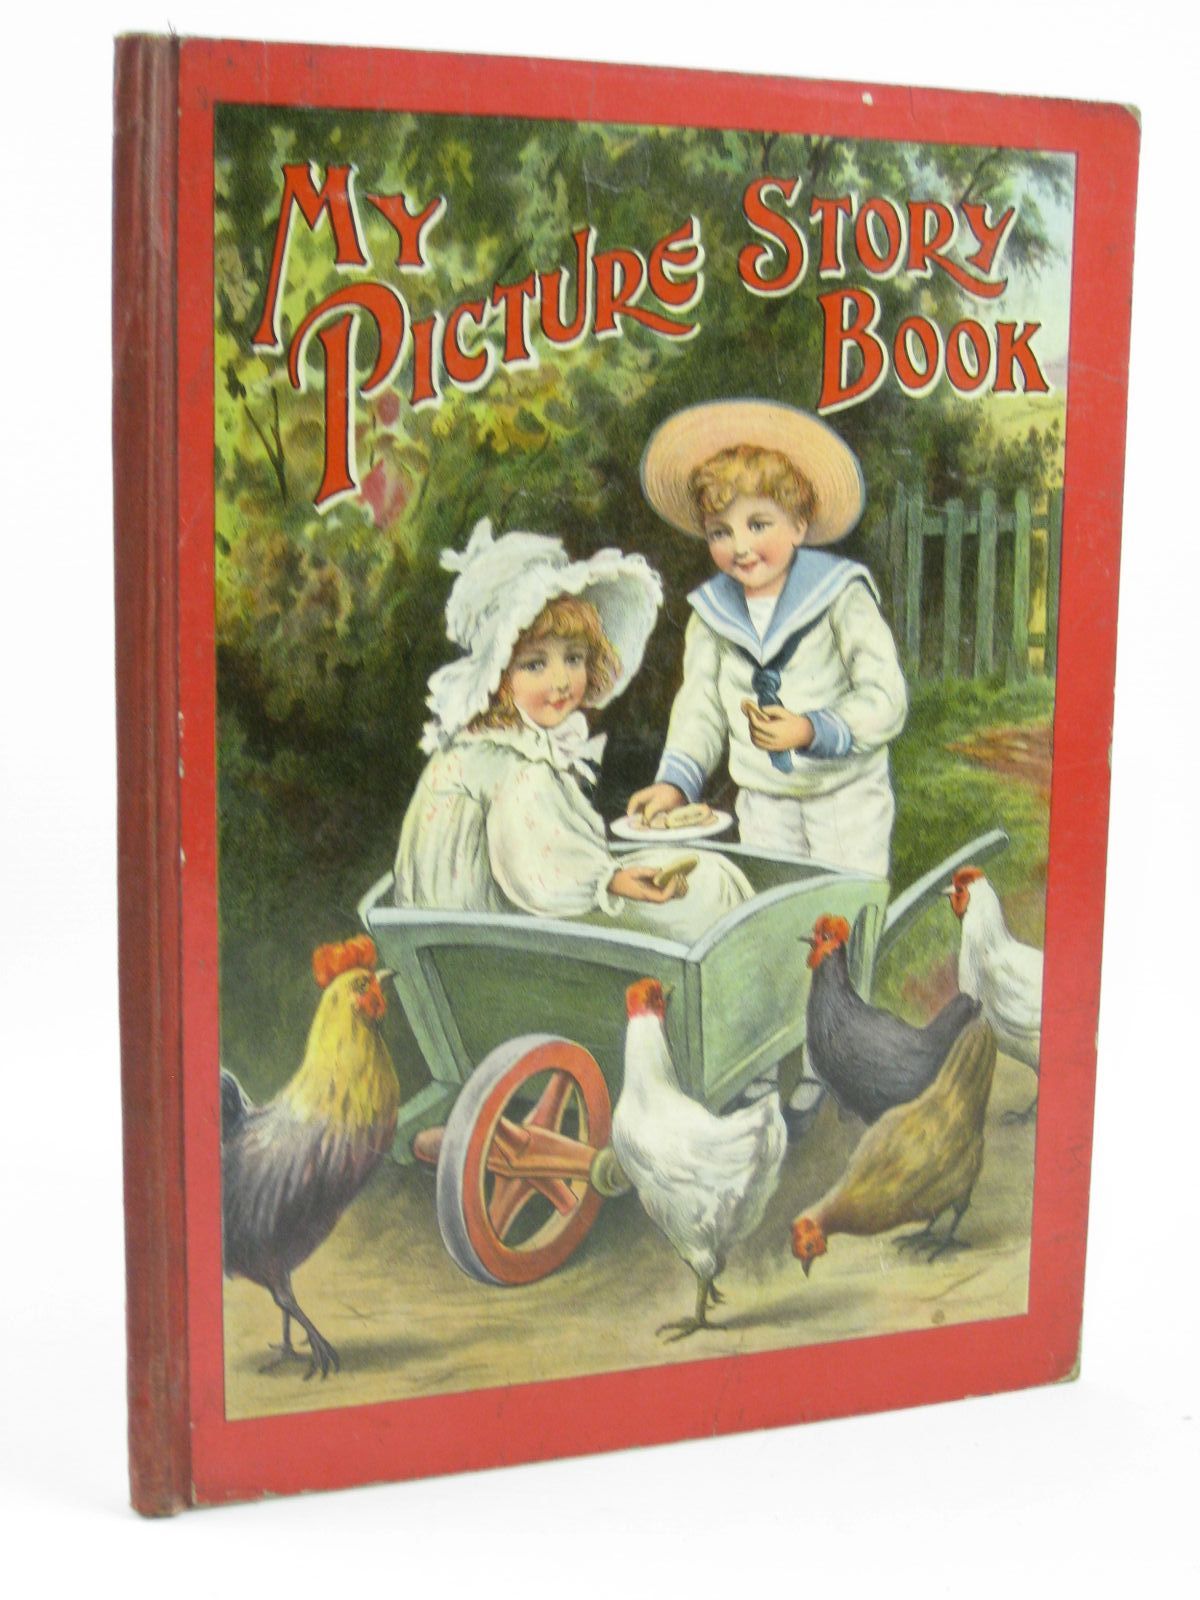 Photo of MY PICTURE STORY BOOK illustrated by Boole, M.A. Pethybridge, J. Ley Weedon, J.F. et al., published by The Religious Tract Society (STOCK CODE: 1506928)  for sale by Stella & Rose's Books